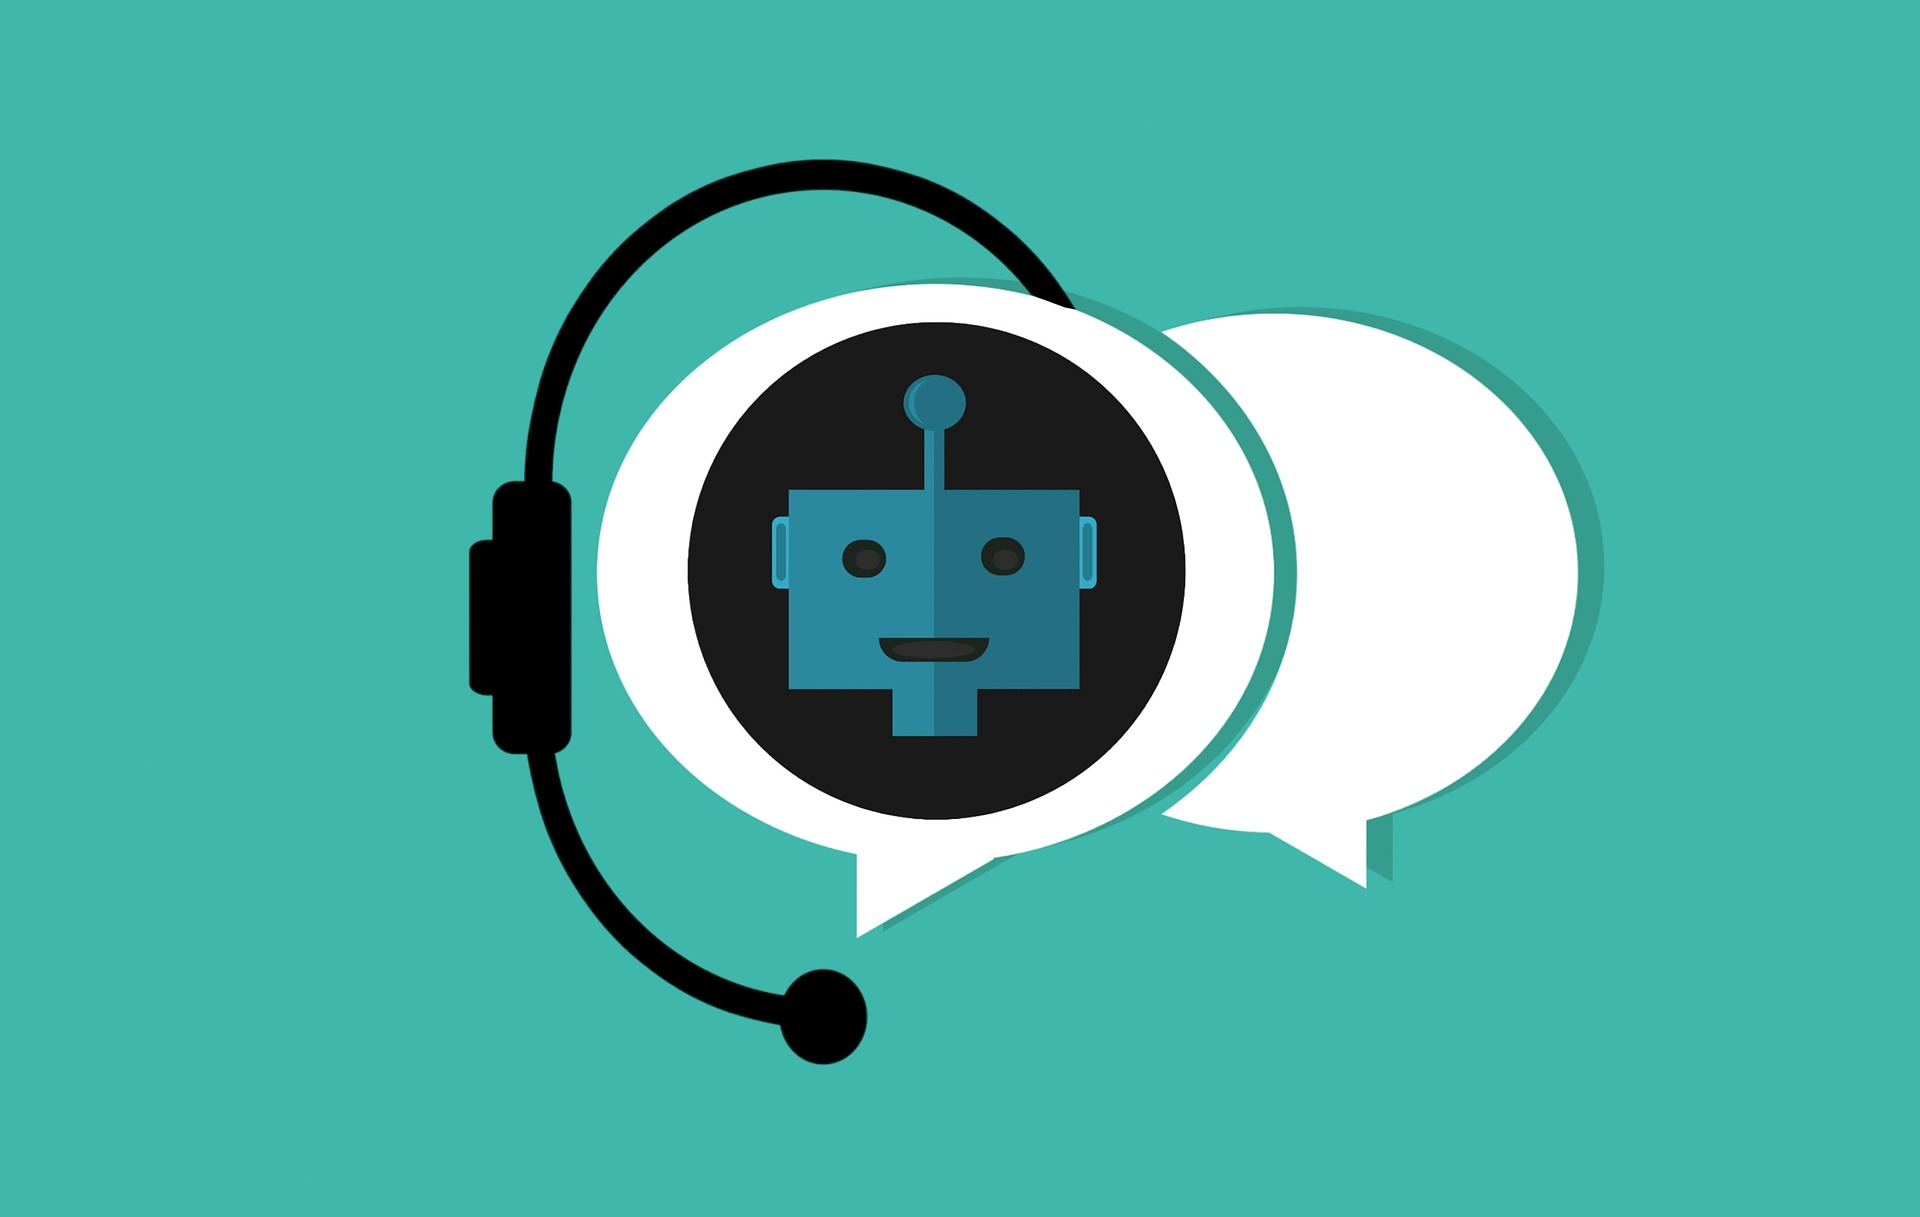 Customer services at local authorities is being transformed by AI technology